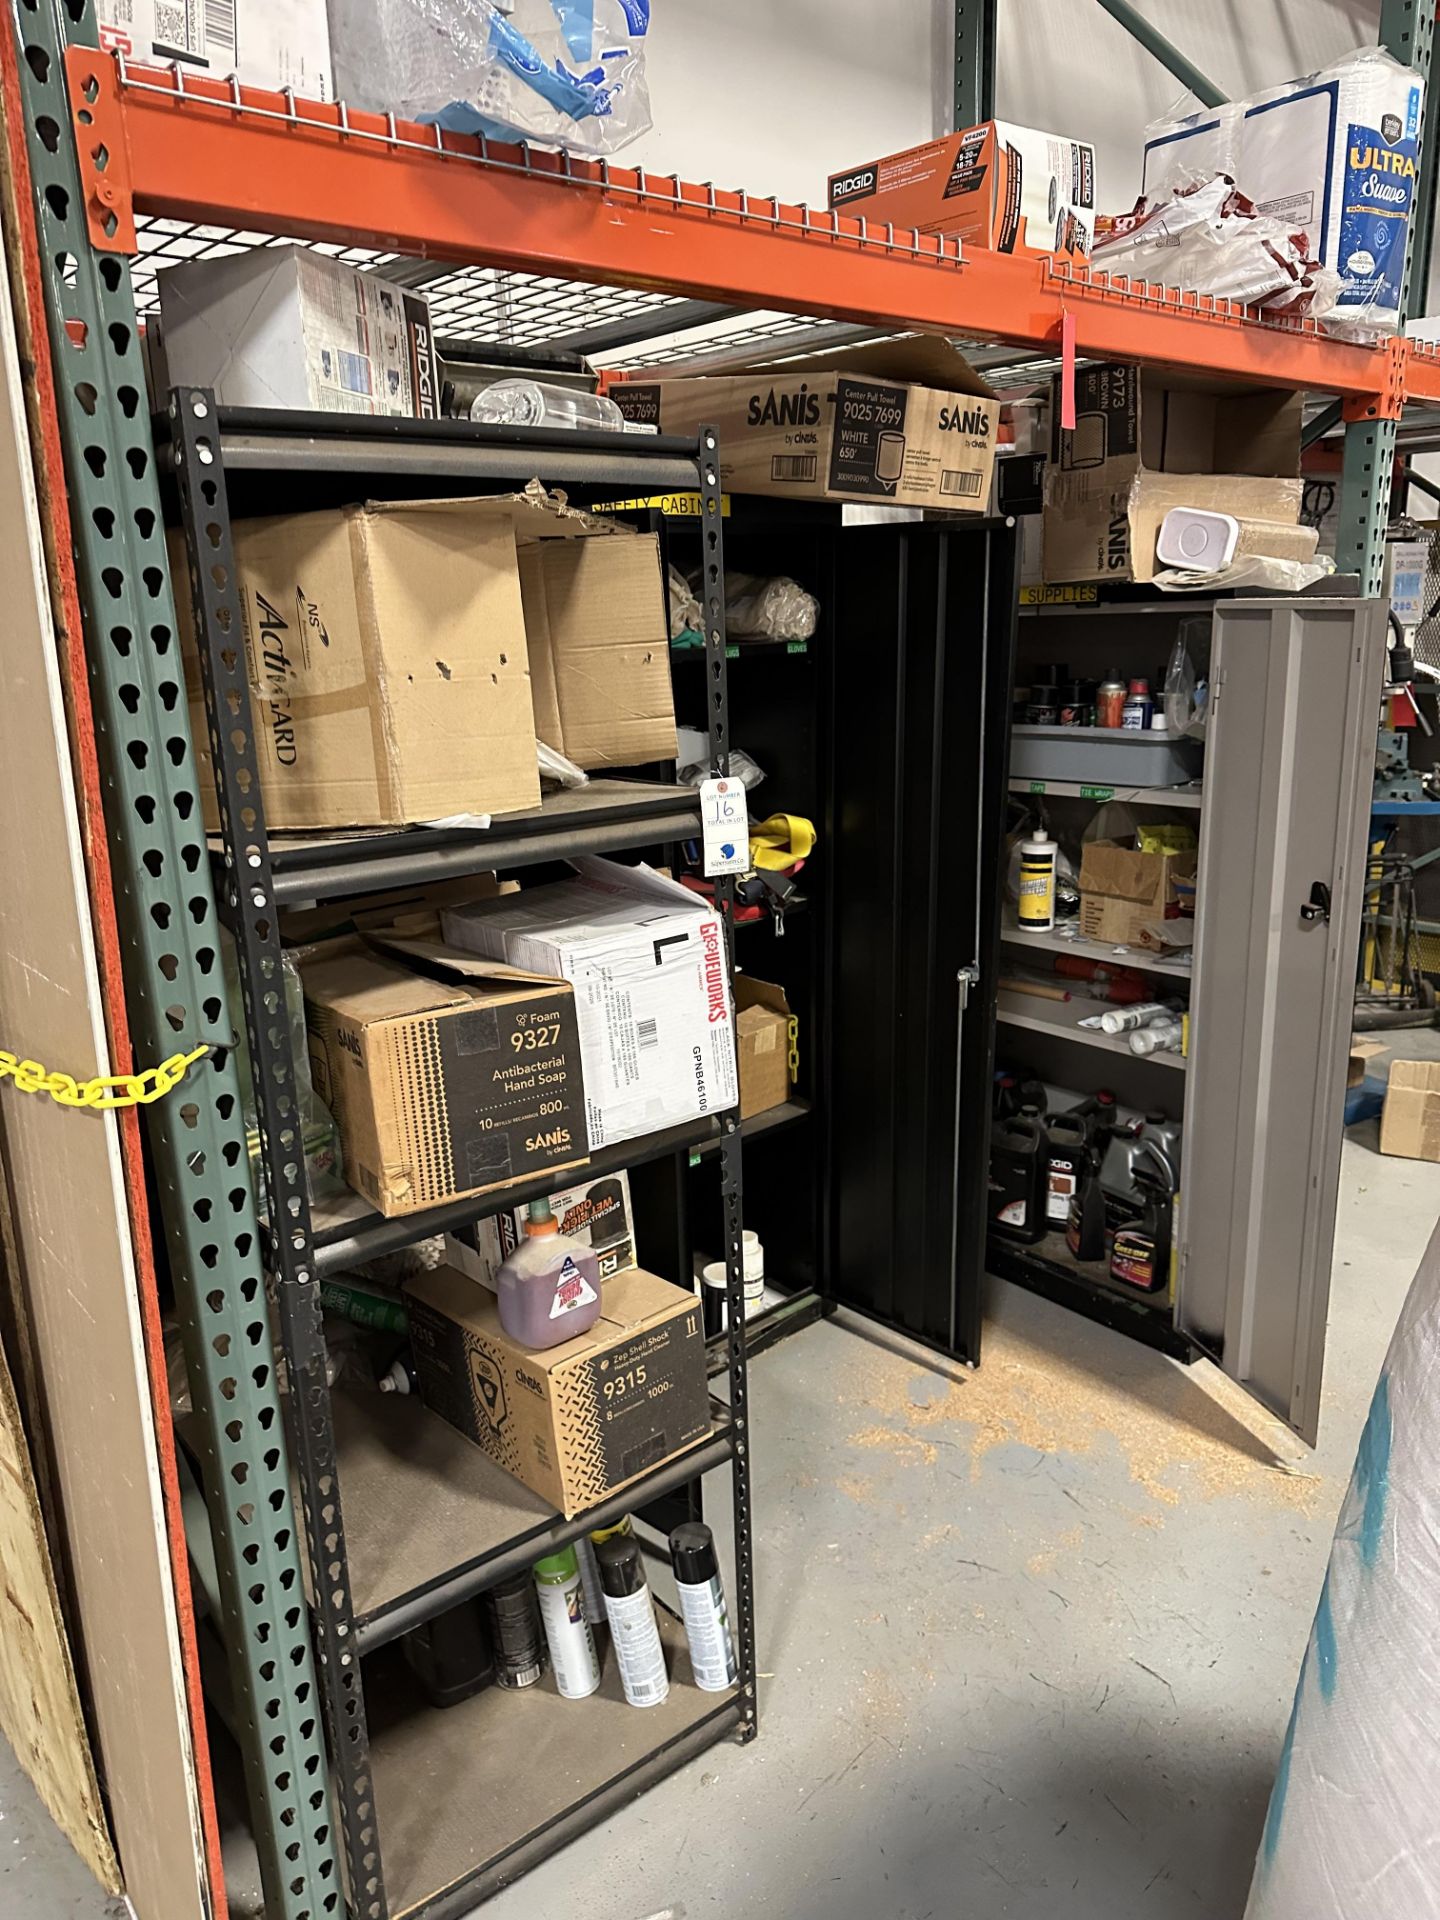 2 Storage Cabinets & Heavy Duty Section of Shelving w/Spare Parts, Spray Paints, Gloves, Towels,